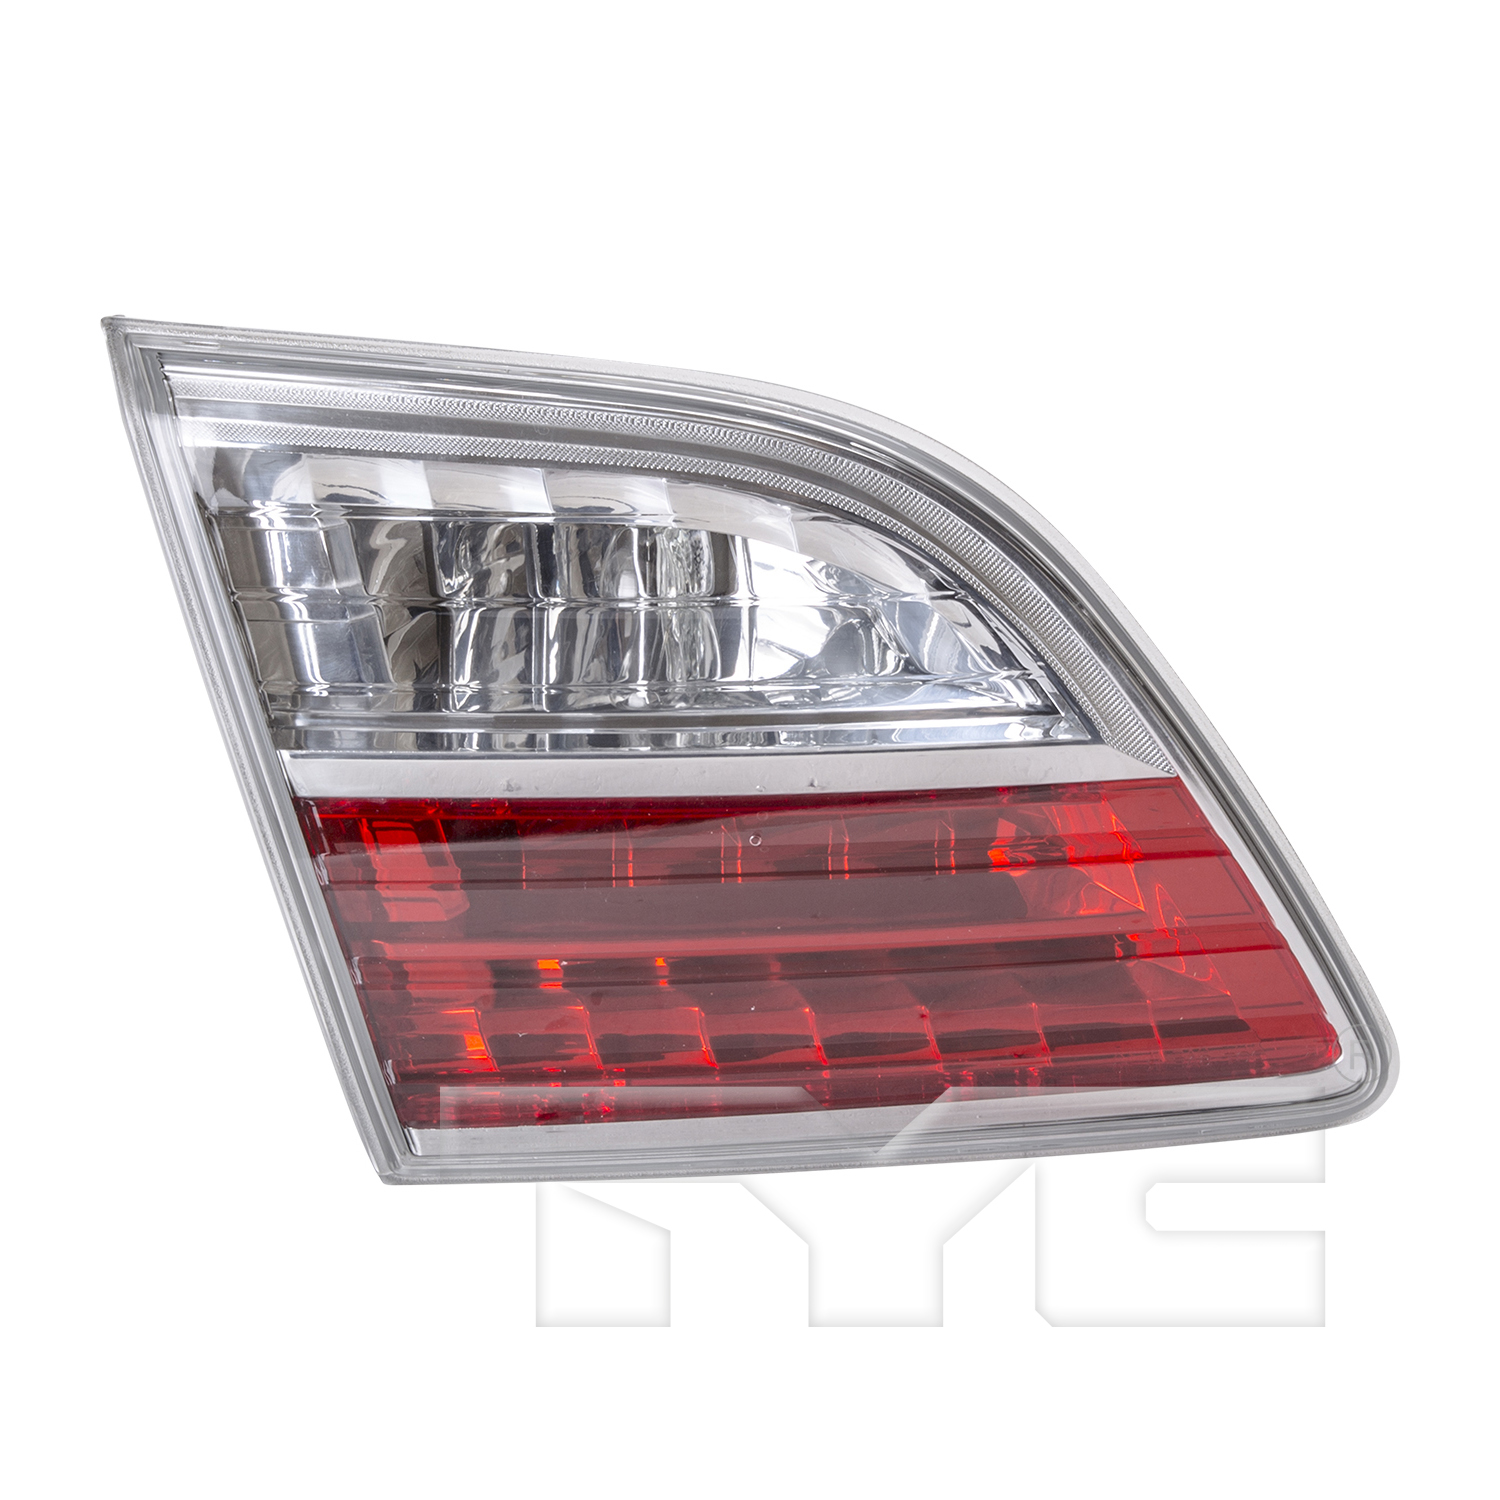 Aftermarket TAILLIGHTS for MAZDA - CX-9, CX-9,10-12,LT Taillamp assy inner